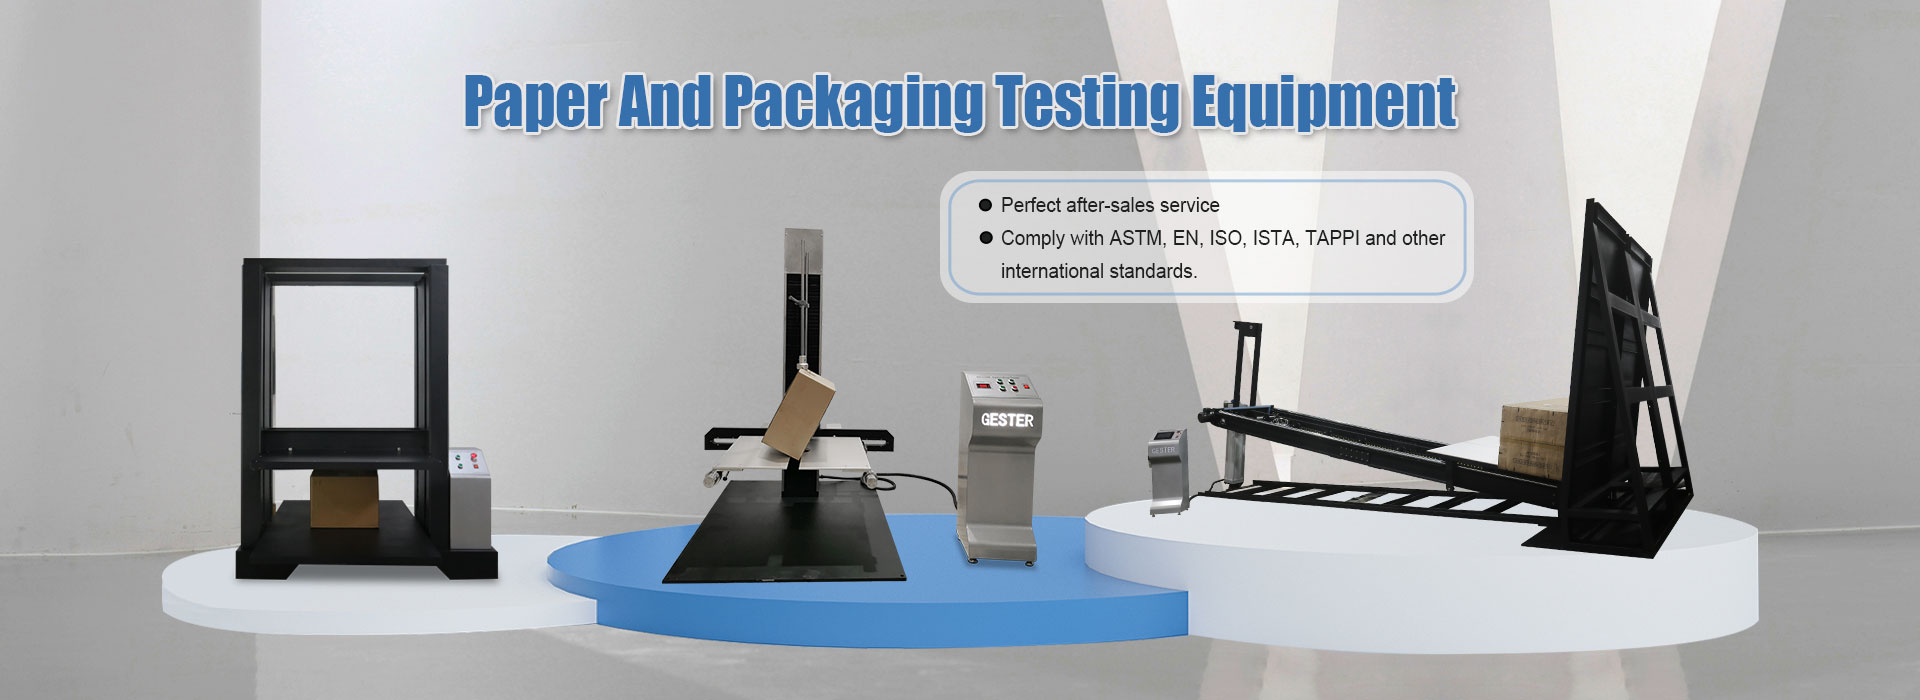 Paper And Packaging Testing Equipment